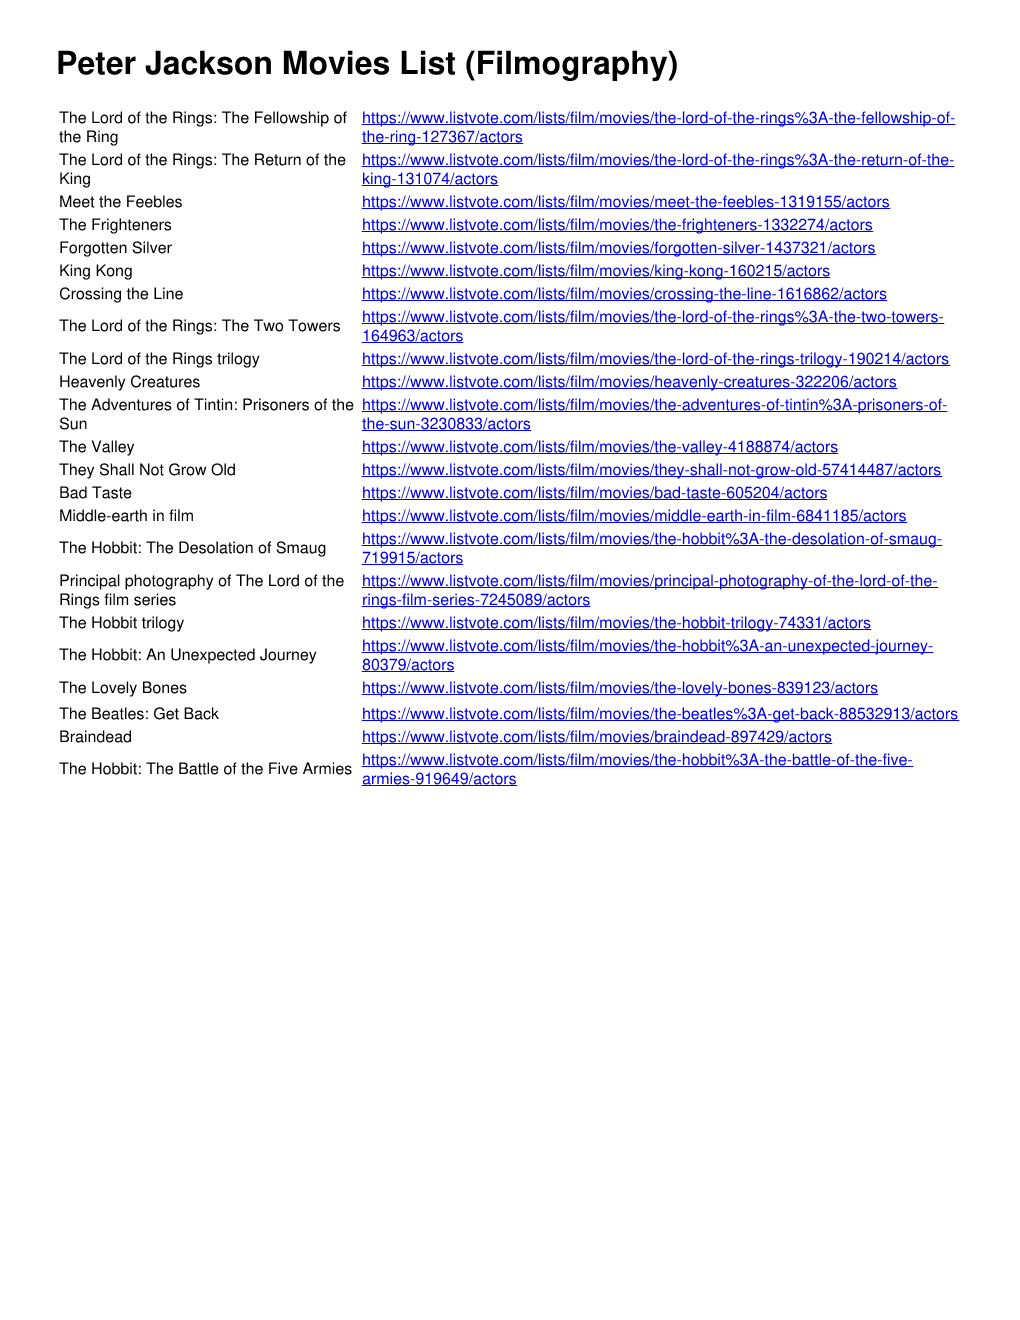 Peter Jackson Films and Movies (Filmography) List